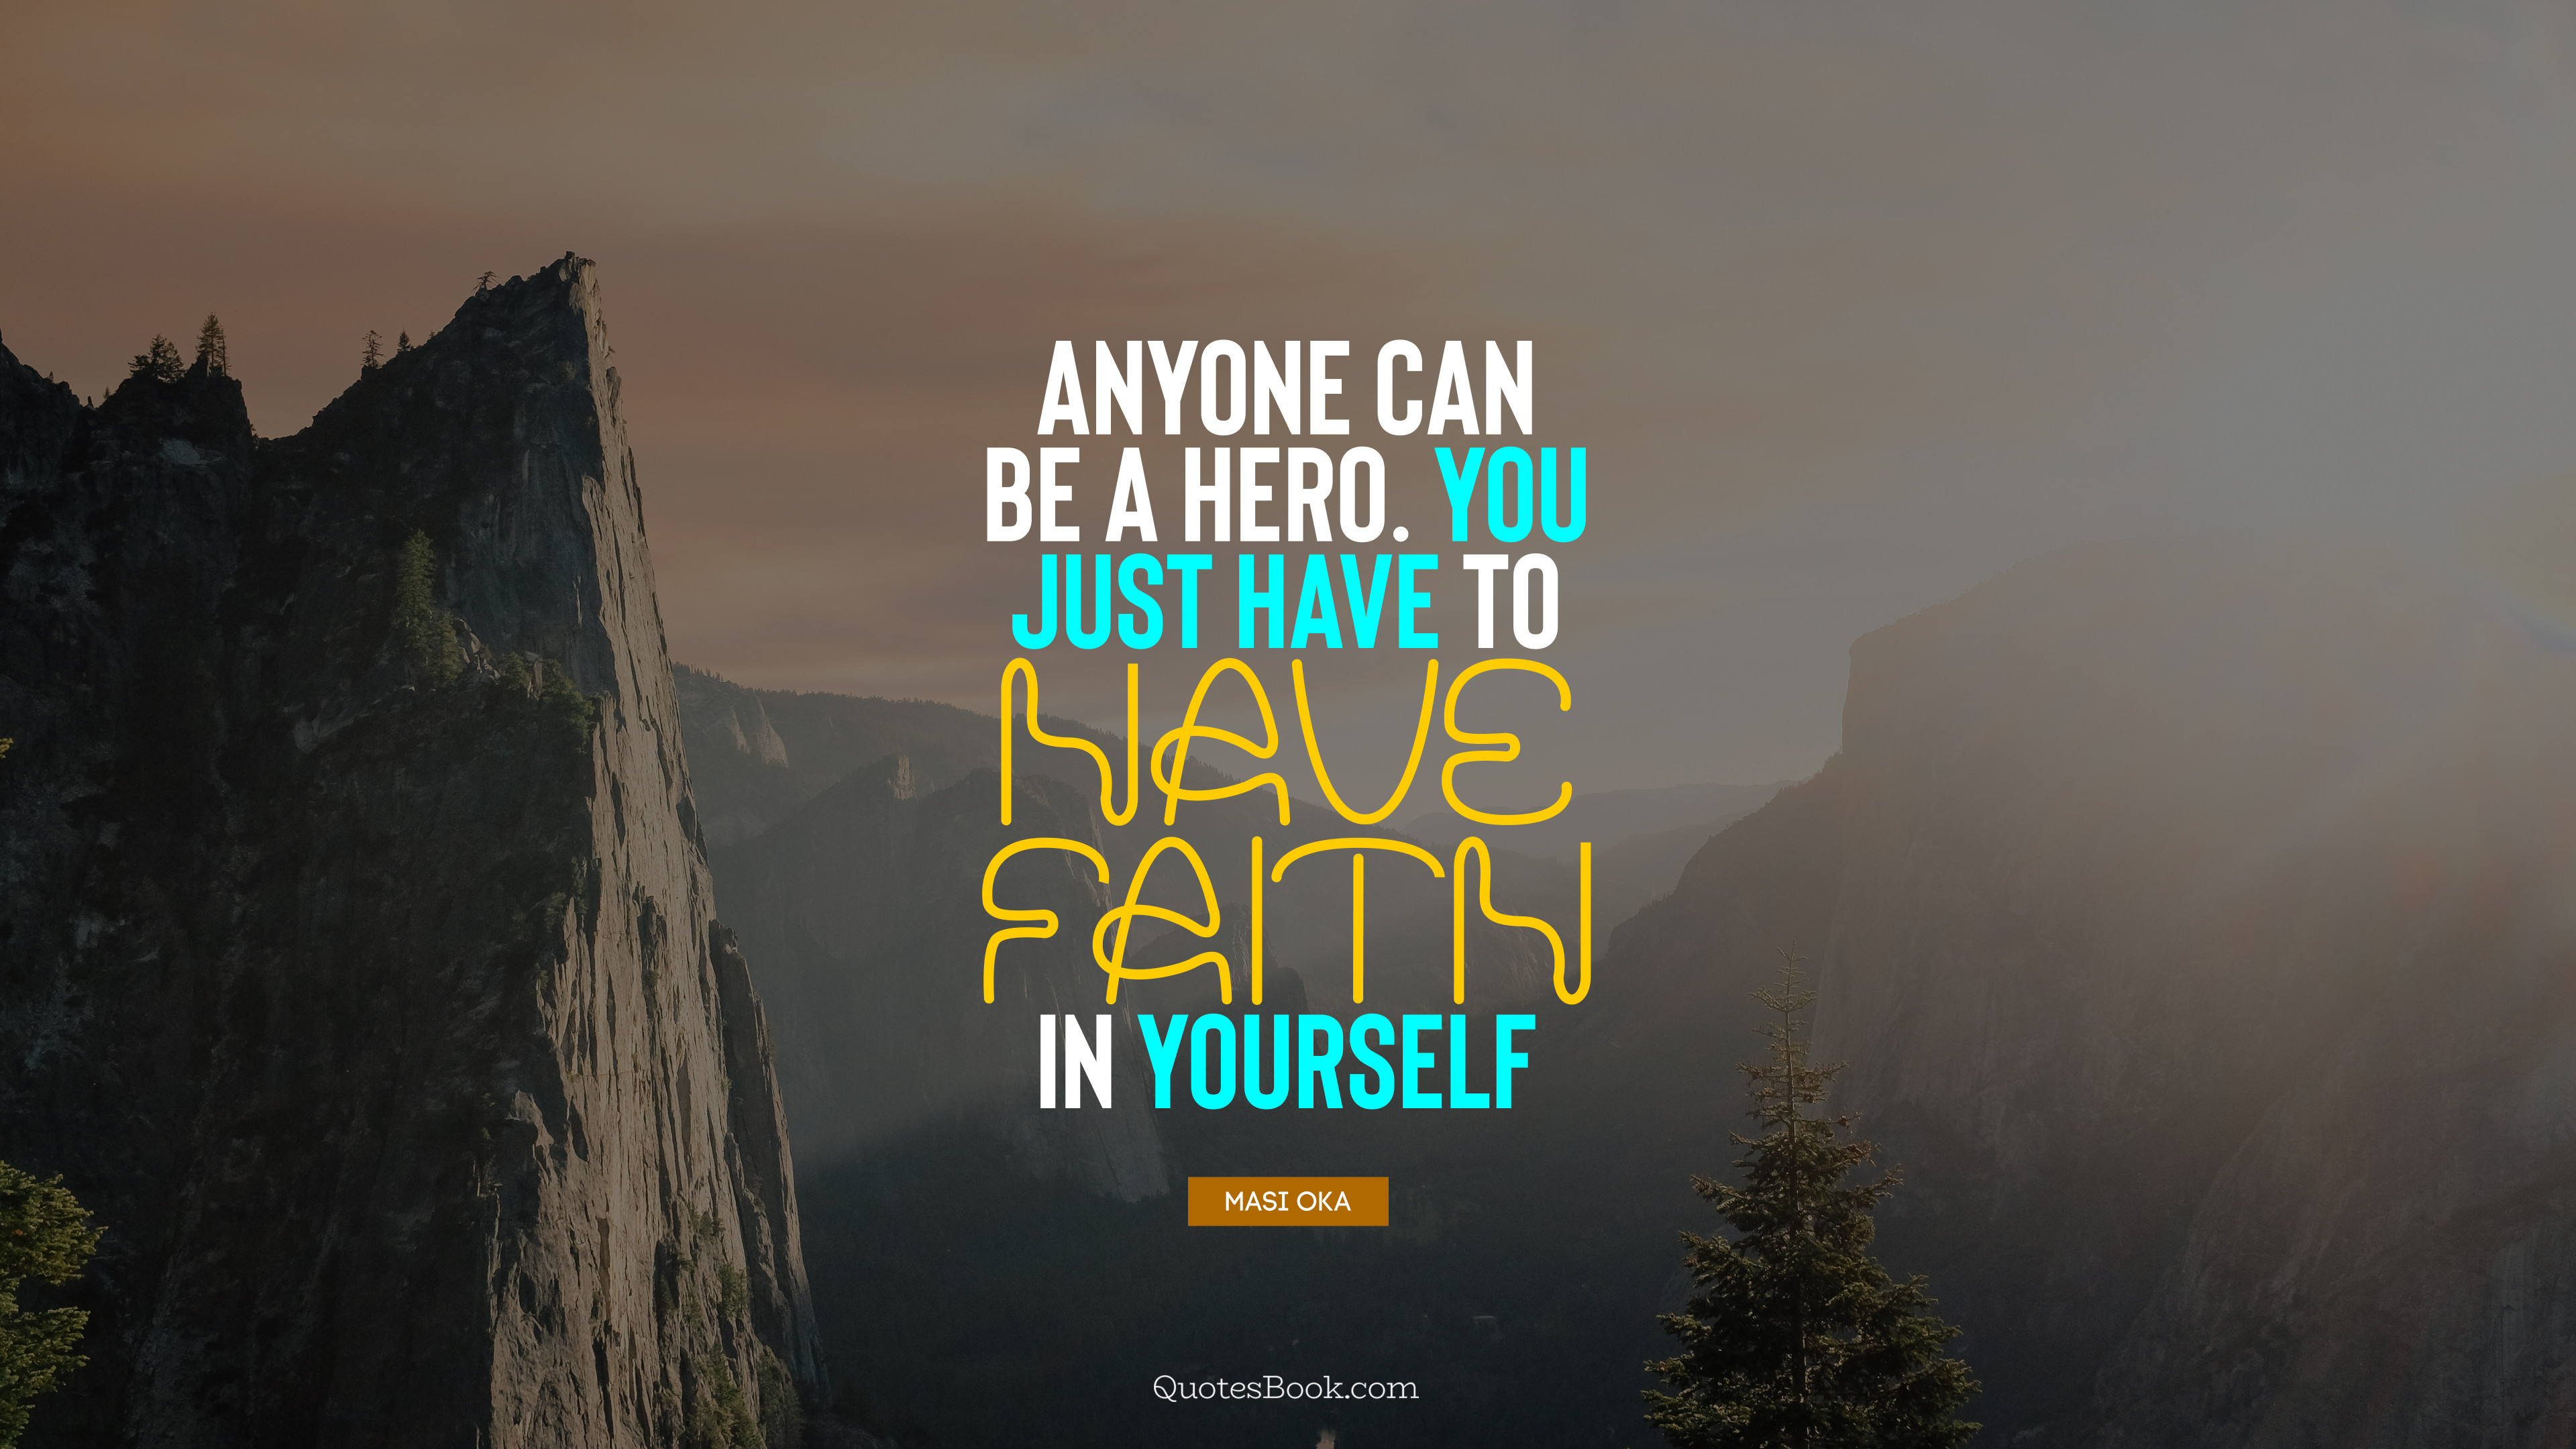 Anyone can be a hero. You just have to have faith in yourself. - Quote